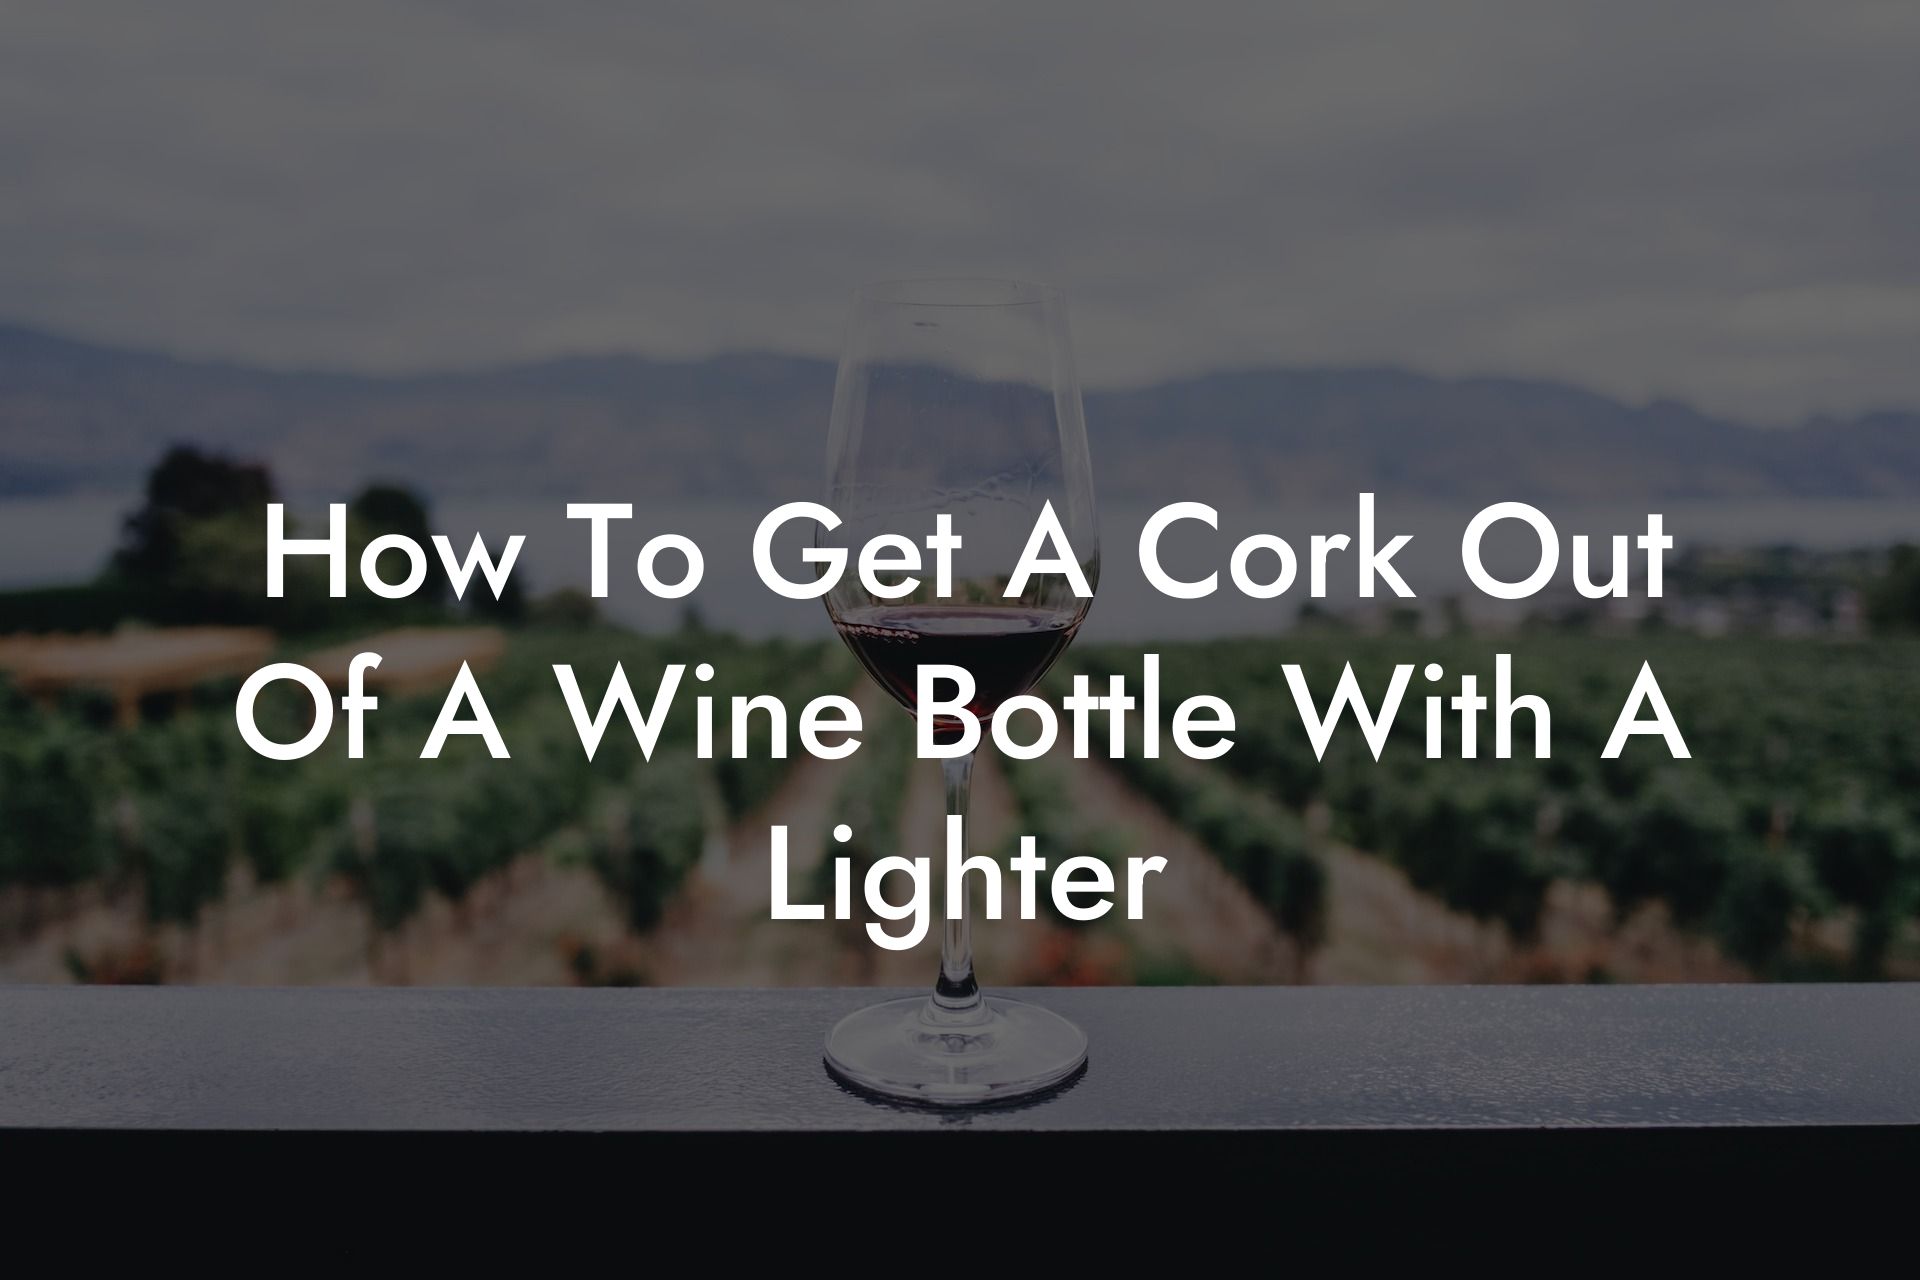 How To Get A Cork Out Of A Wine Bottle With A Lighter